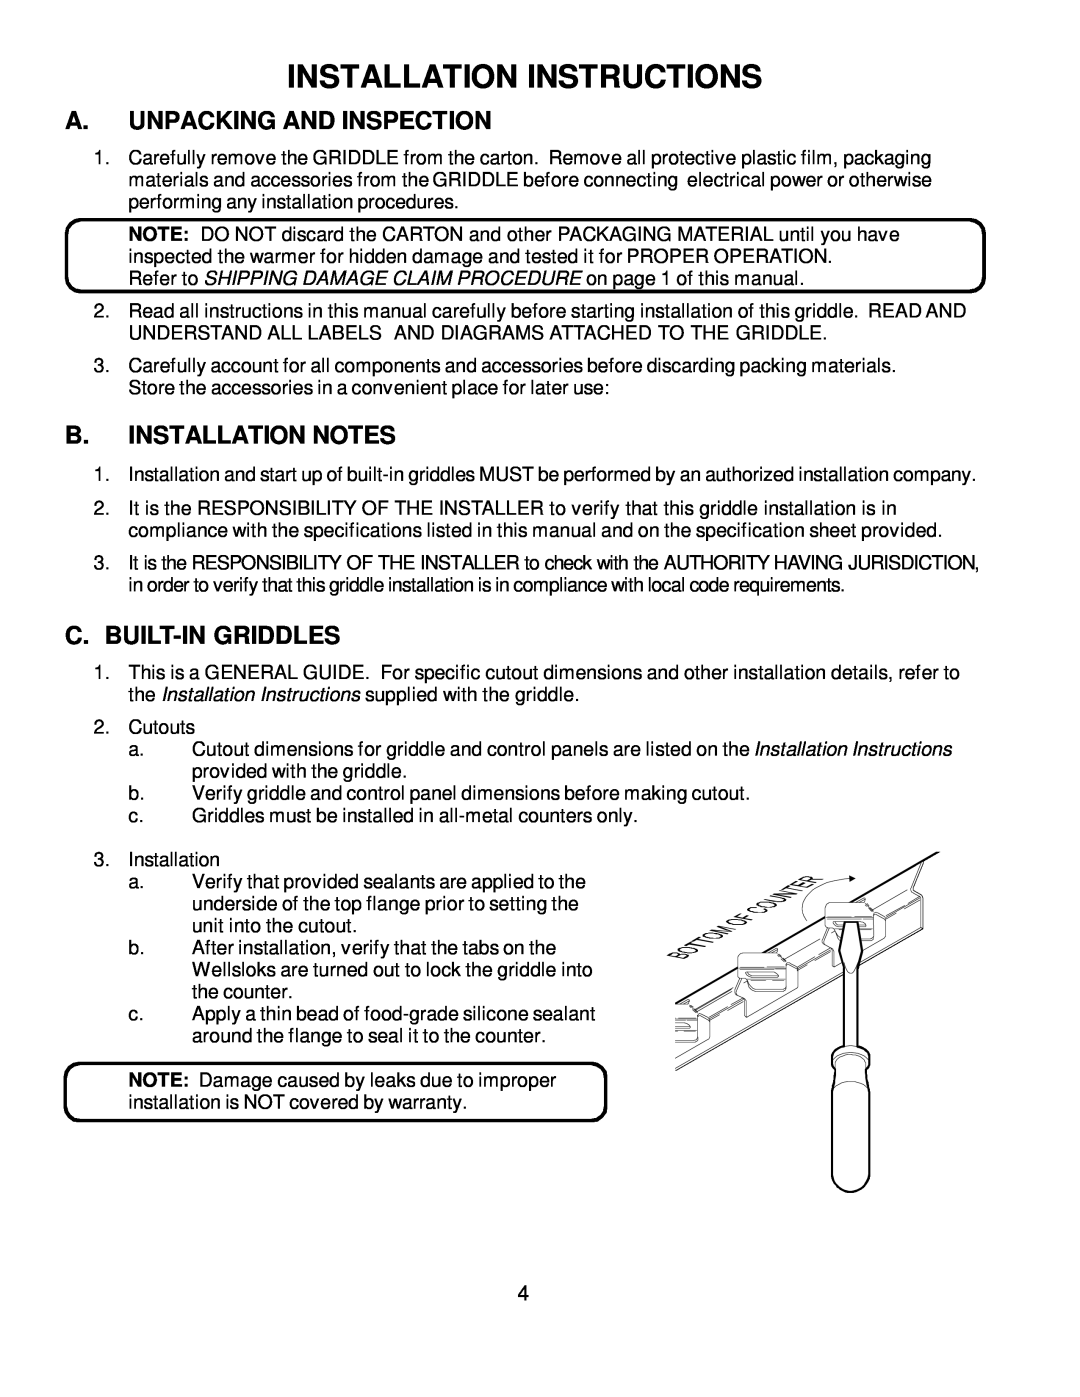 Wells Bulit-In Electric Griddles Installation Instructions, A.Unpacking And Inspection, B.Installation Notes 